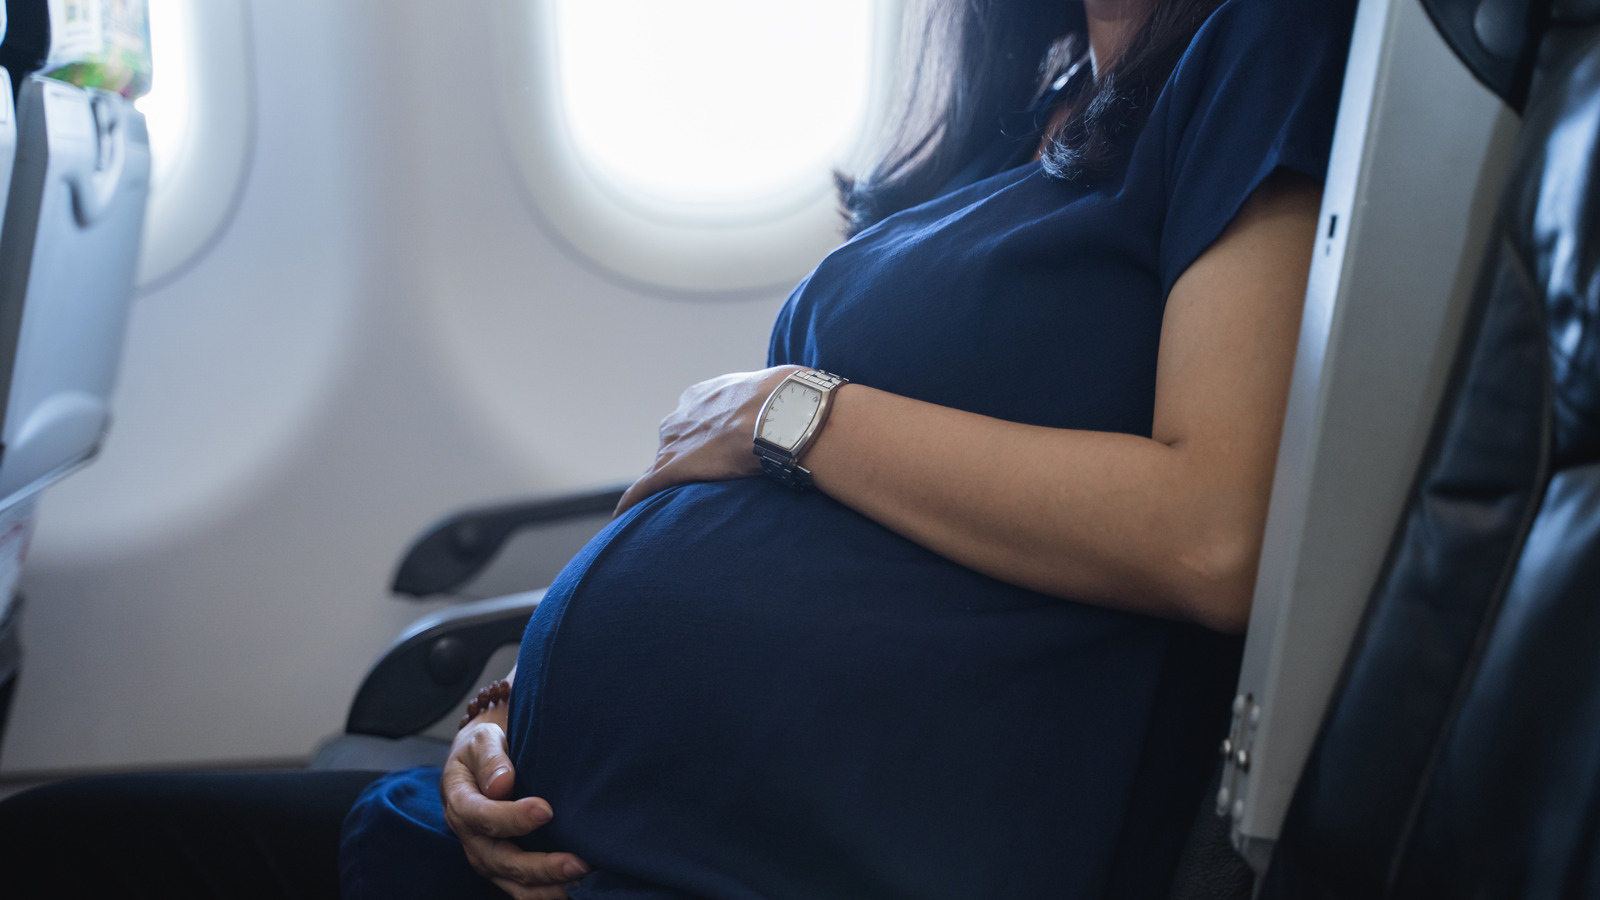 can i travel on plane when pregnant